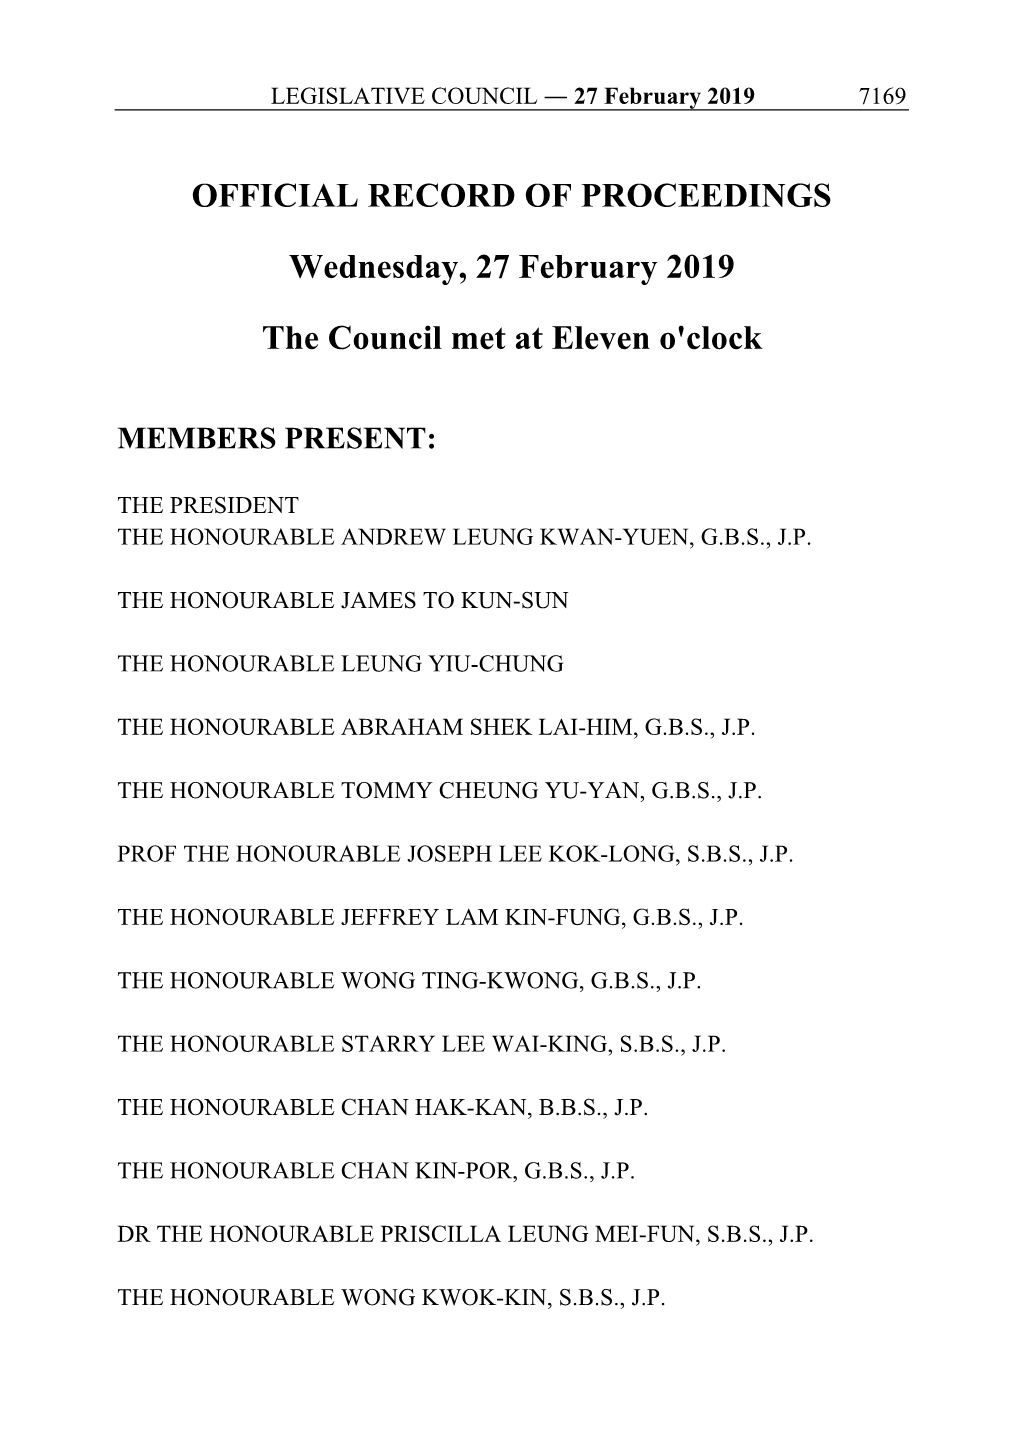 OFFICIAL RECORD of PROCEEDINGS Wednesday, 27